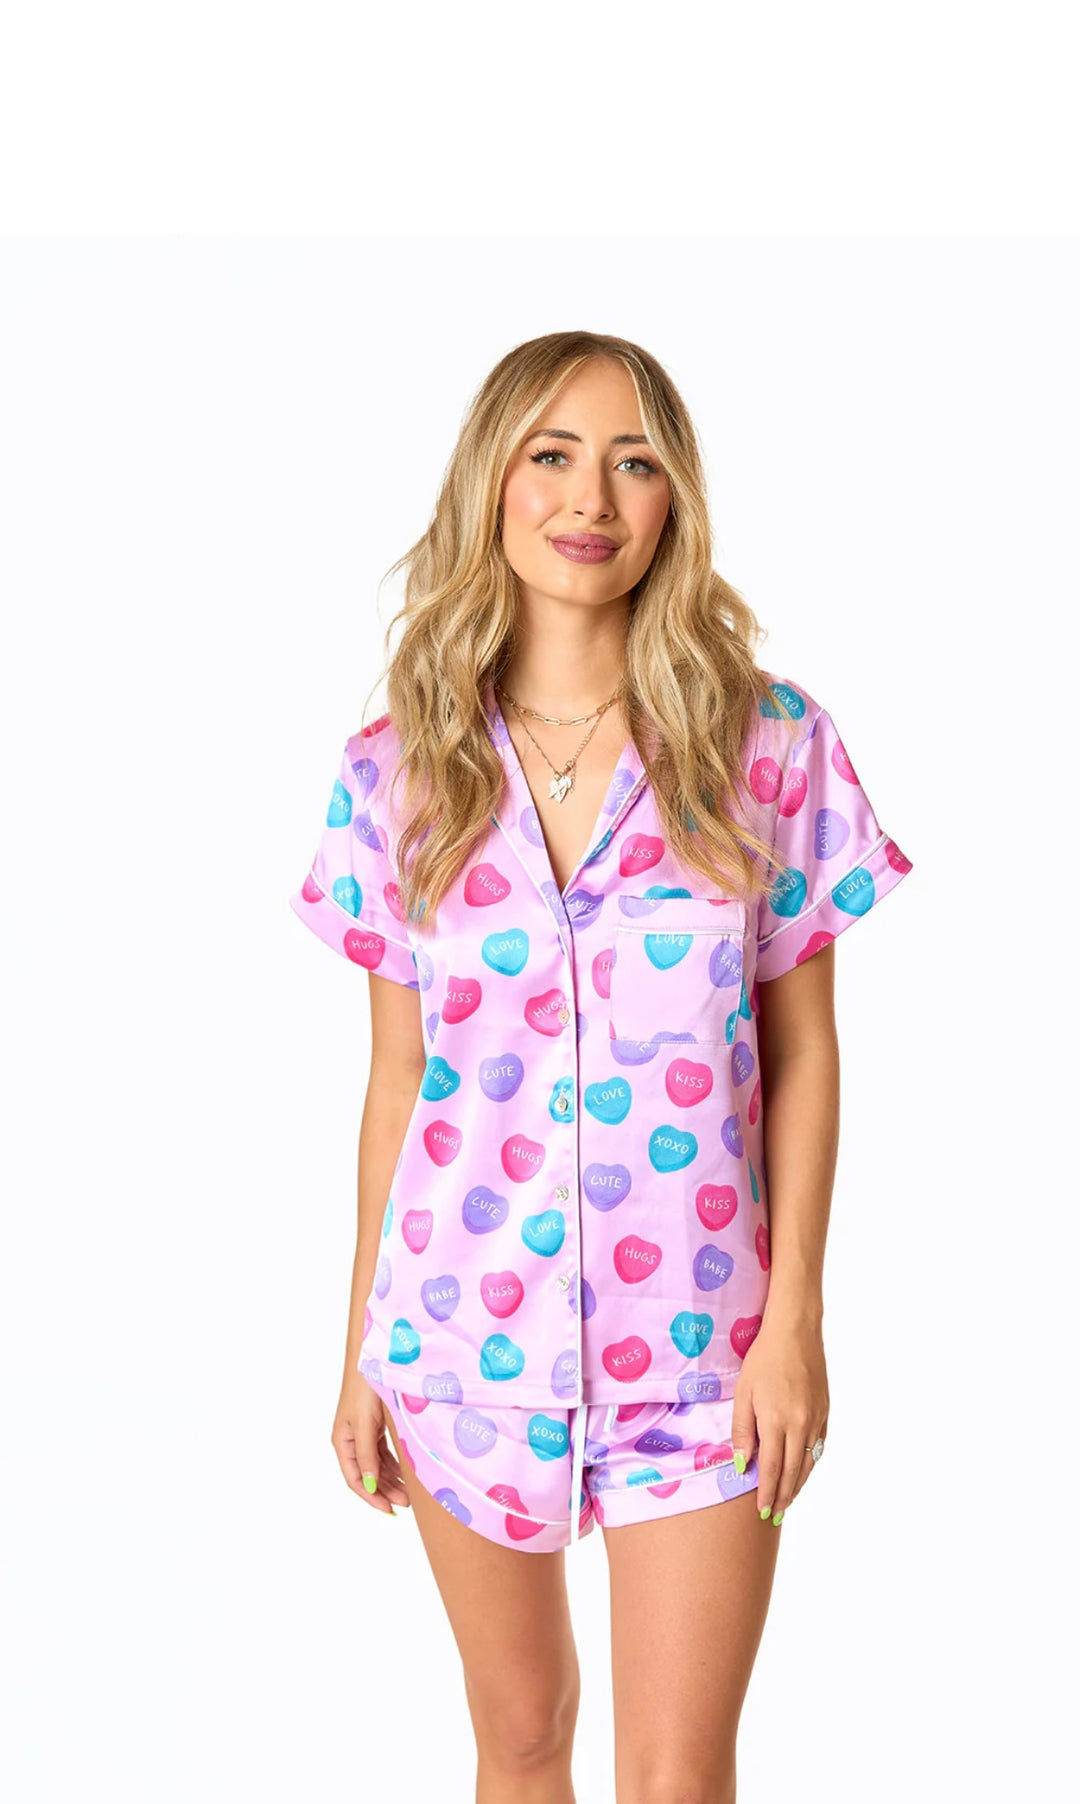 Aurora Sweet Hearts Pajama Set-Outfits-Buddy Love-Shop with Bloom West Boutique, Women's Fashion Boutique, Located in Houma, Louisiana